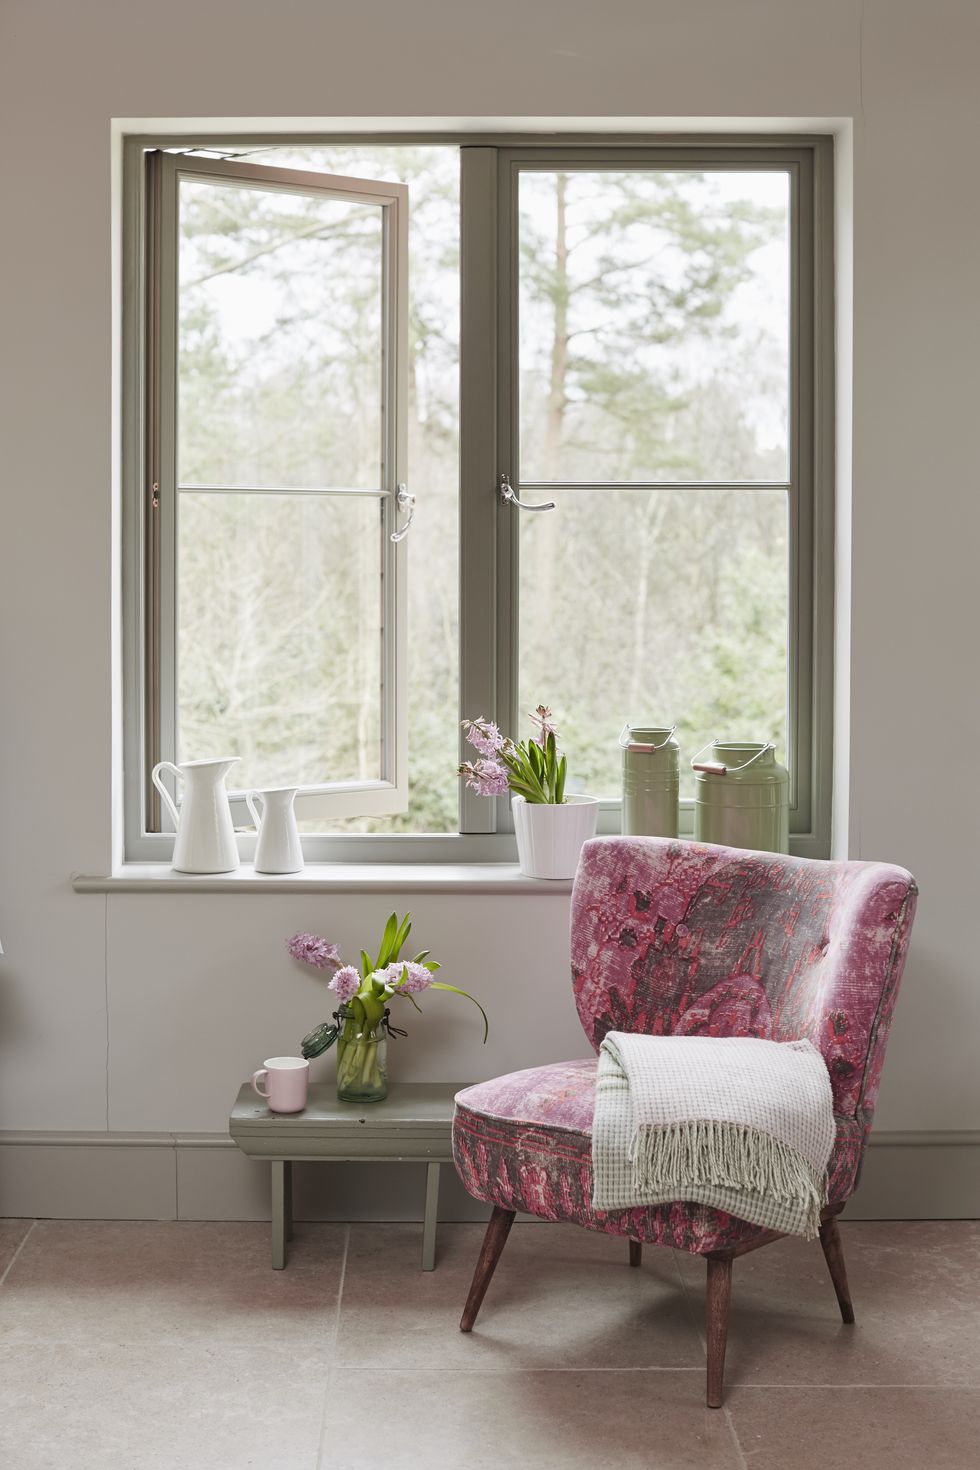 Wood window alliance pink floral chair